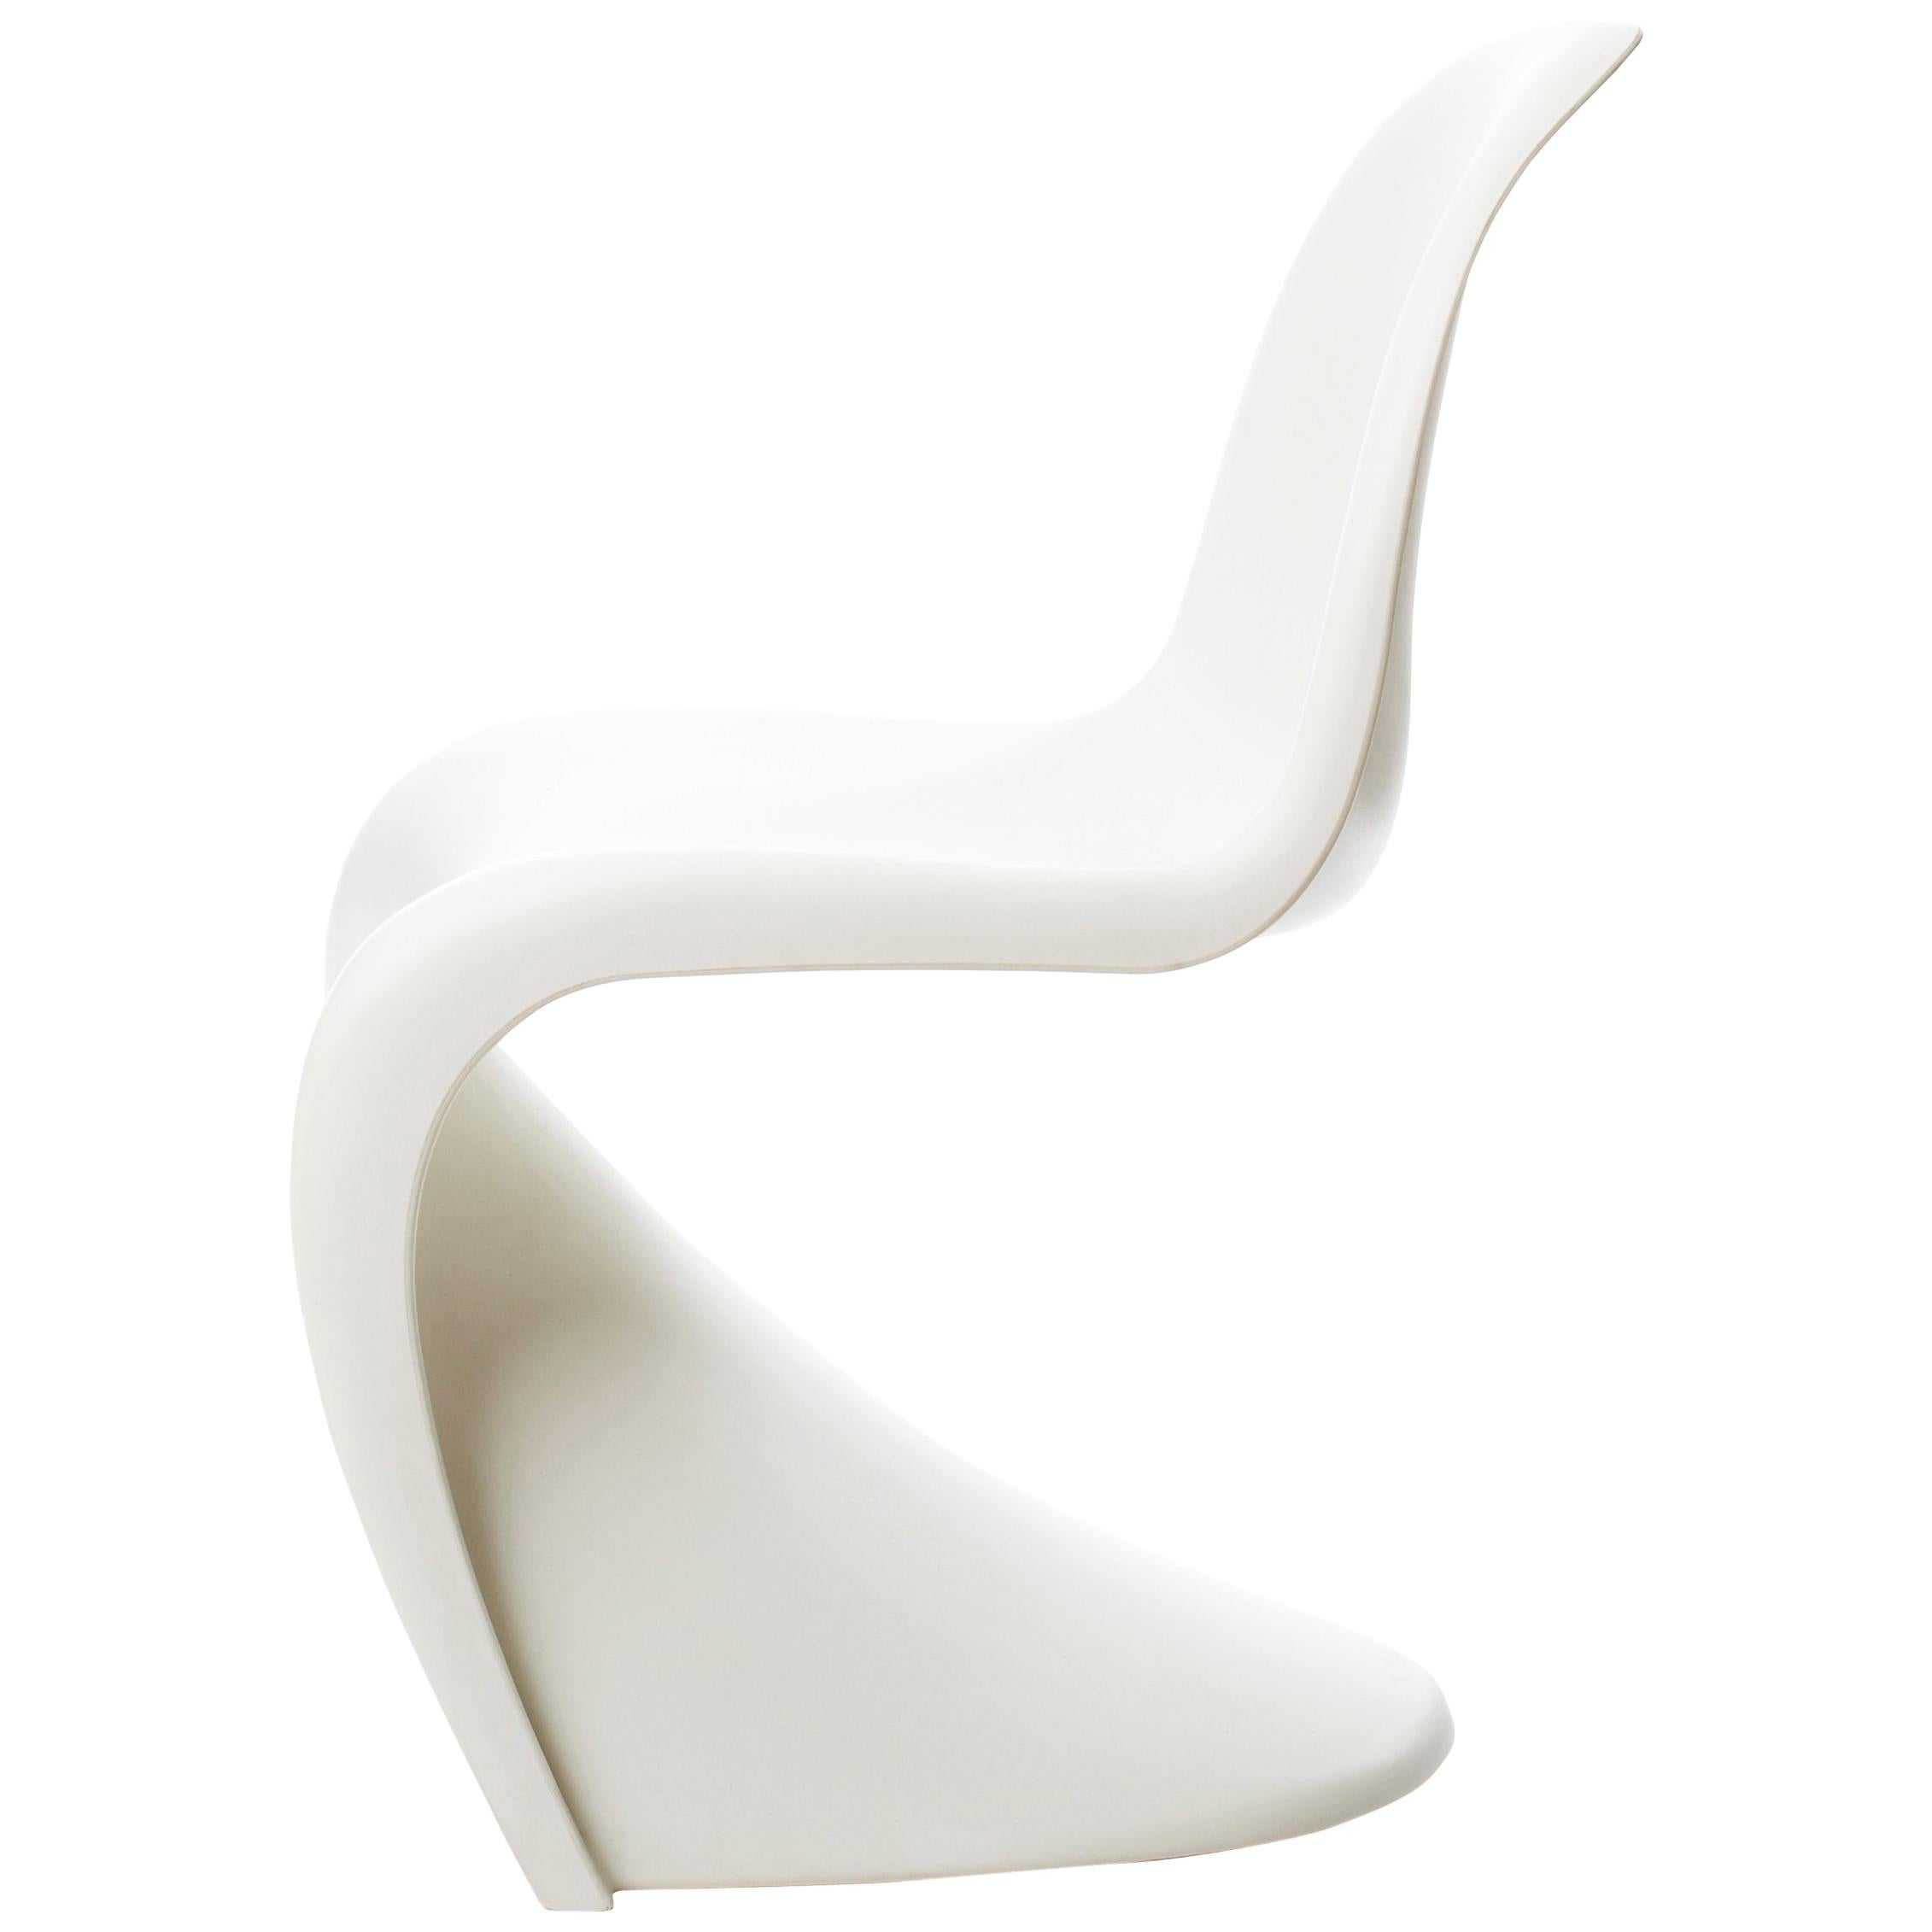 Vitra Panton Chair in White by Verner Panton For Sale